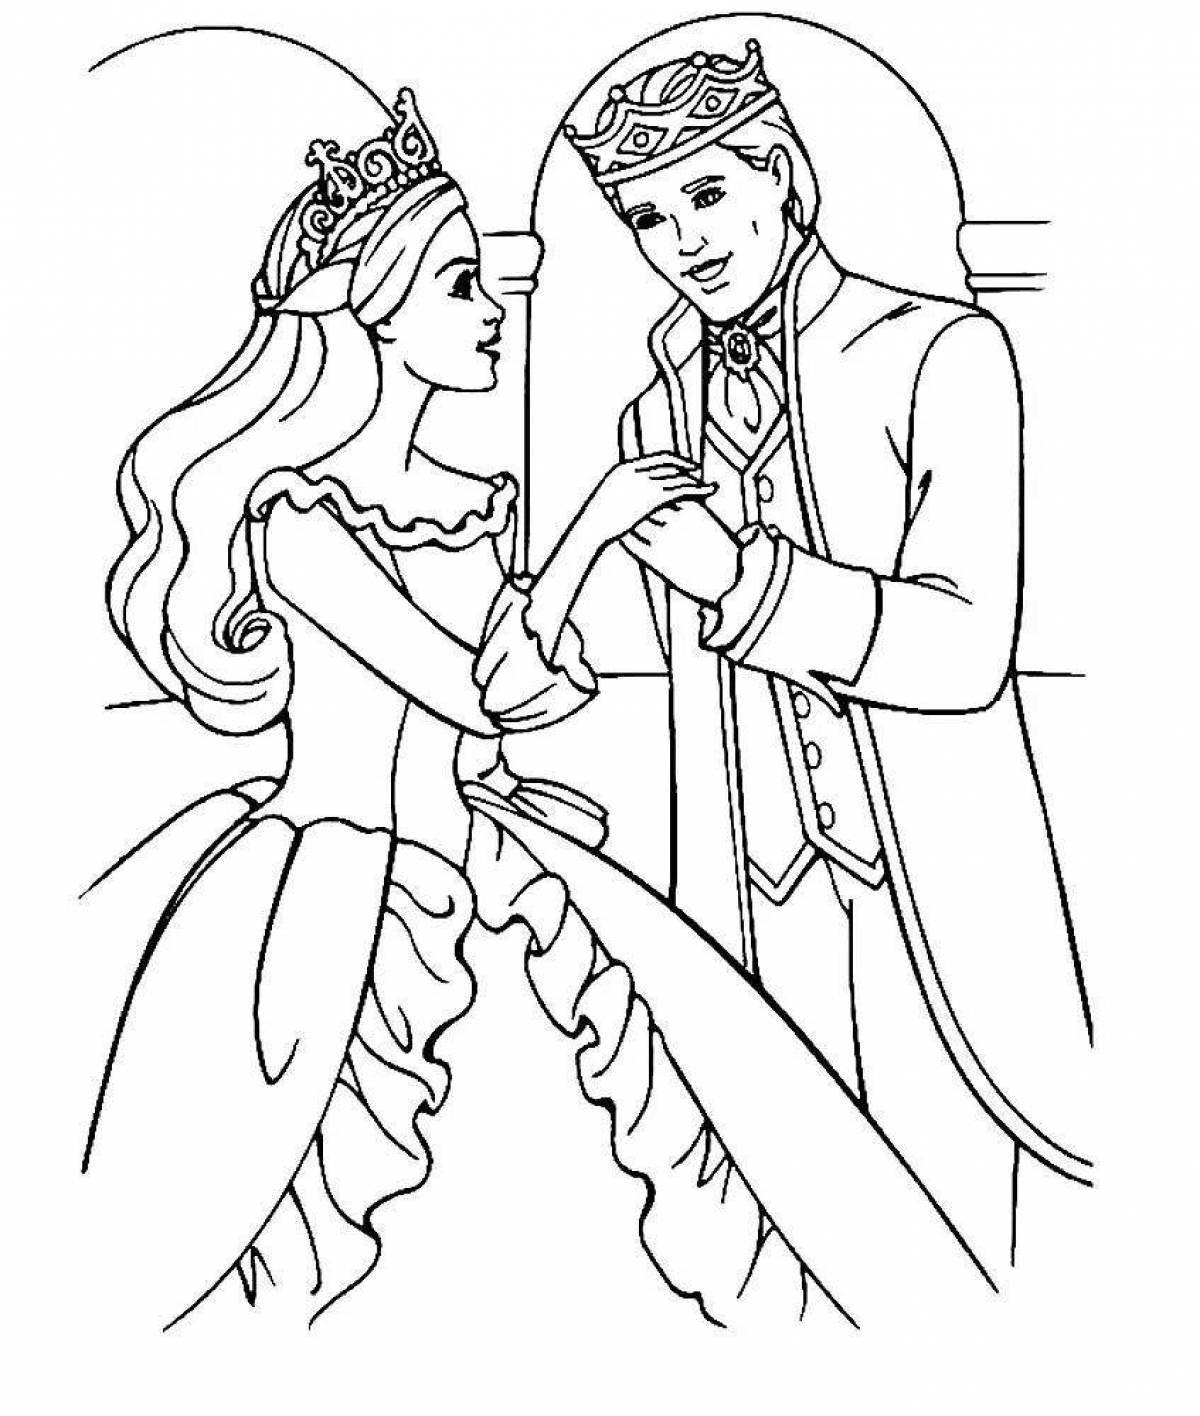 Rampant King and Queen Coloring Page